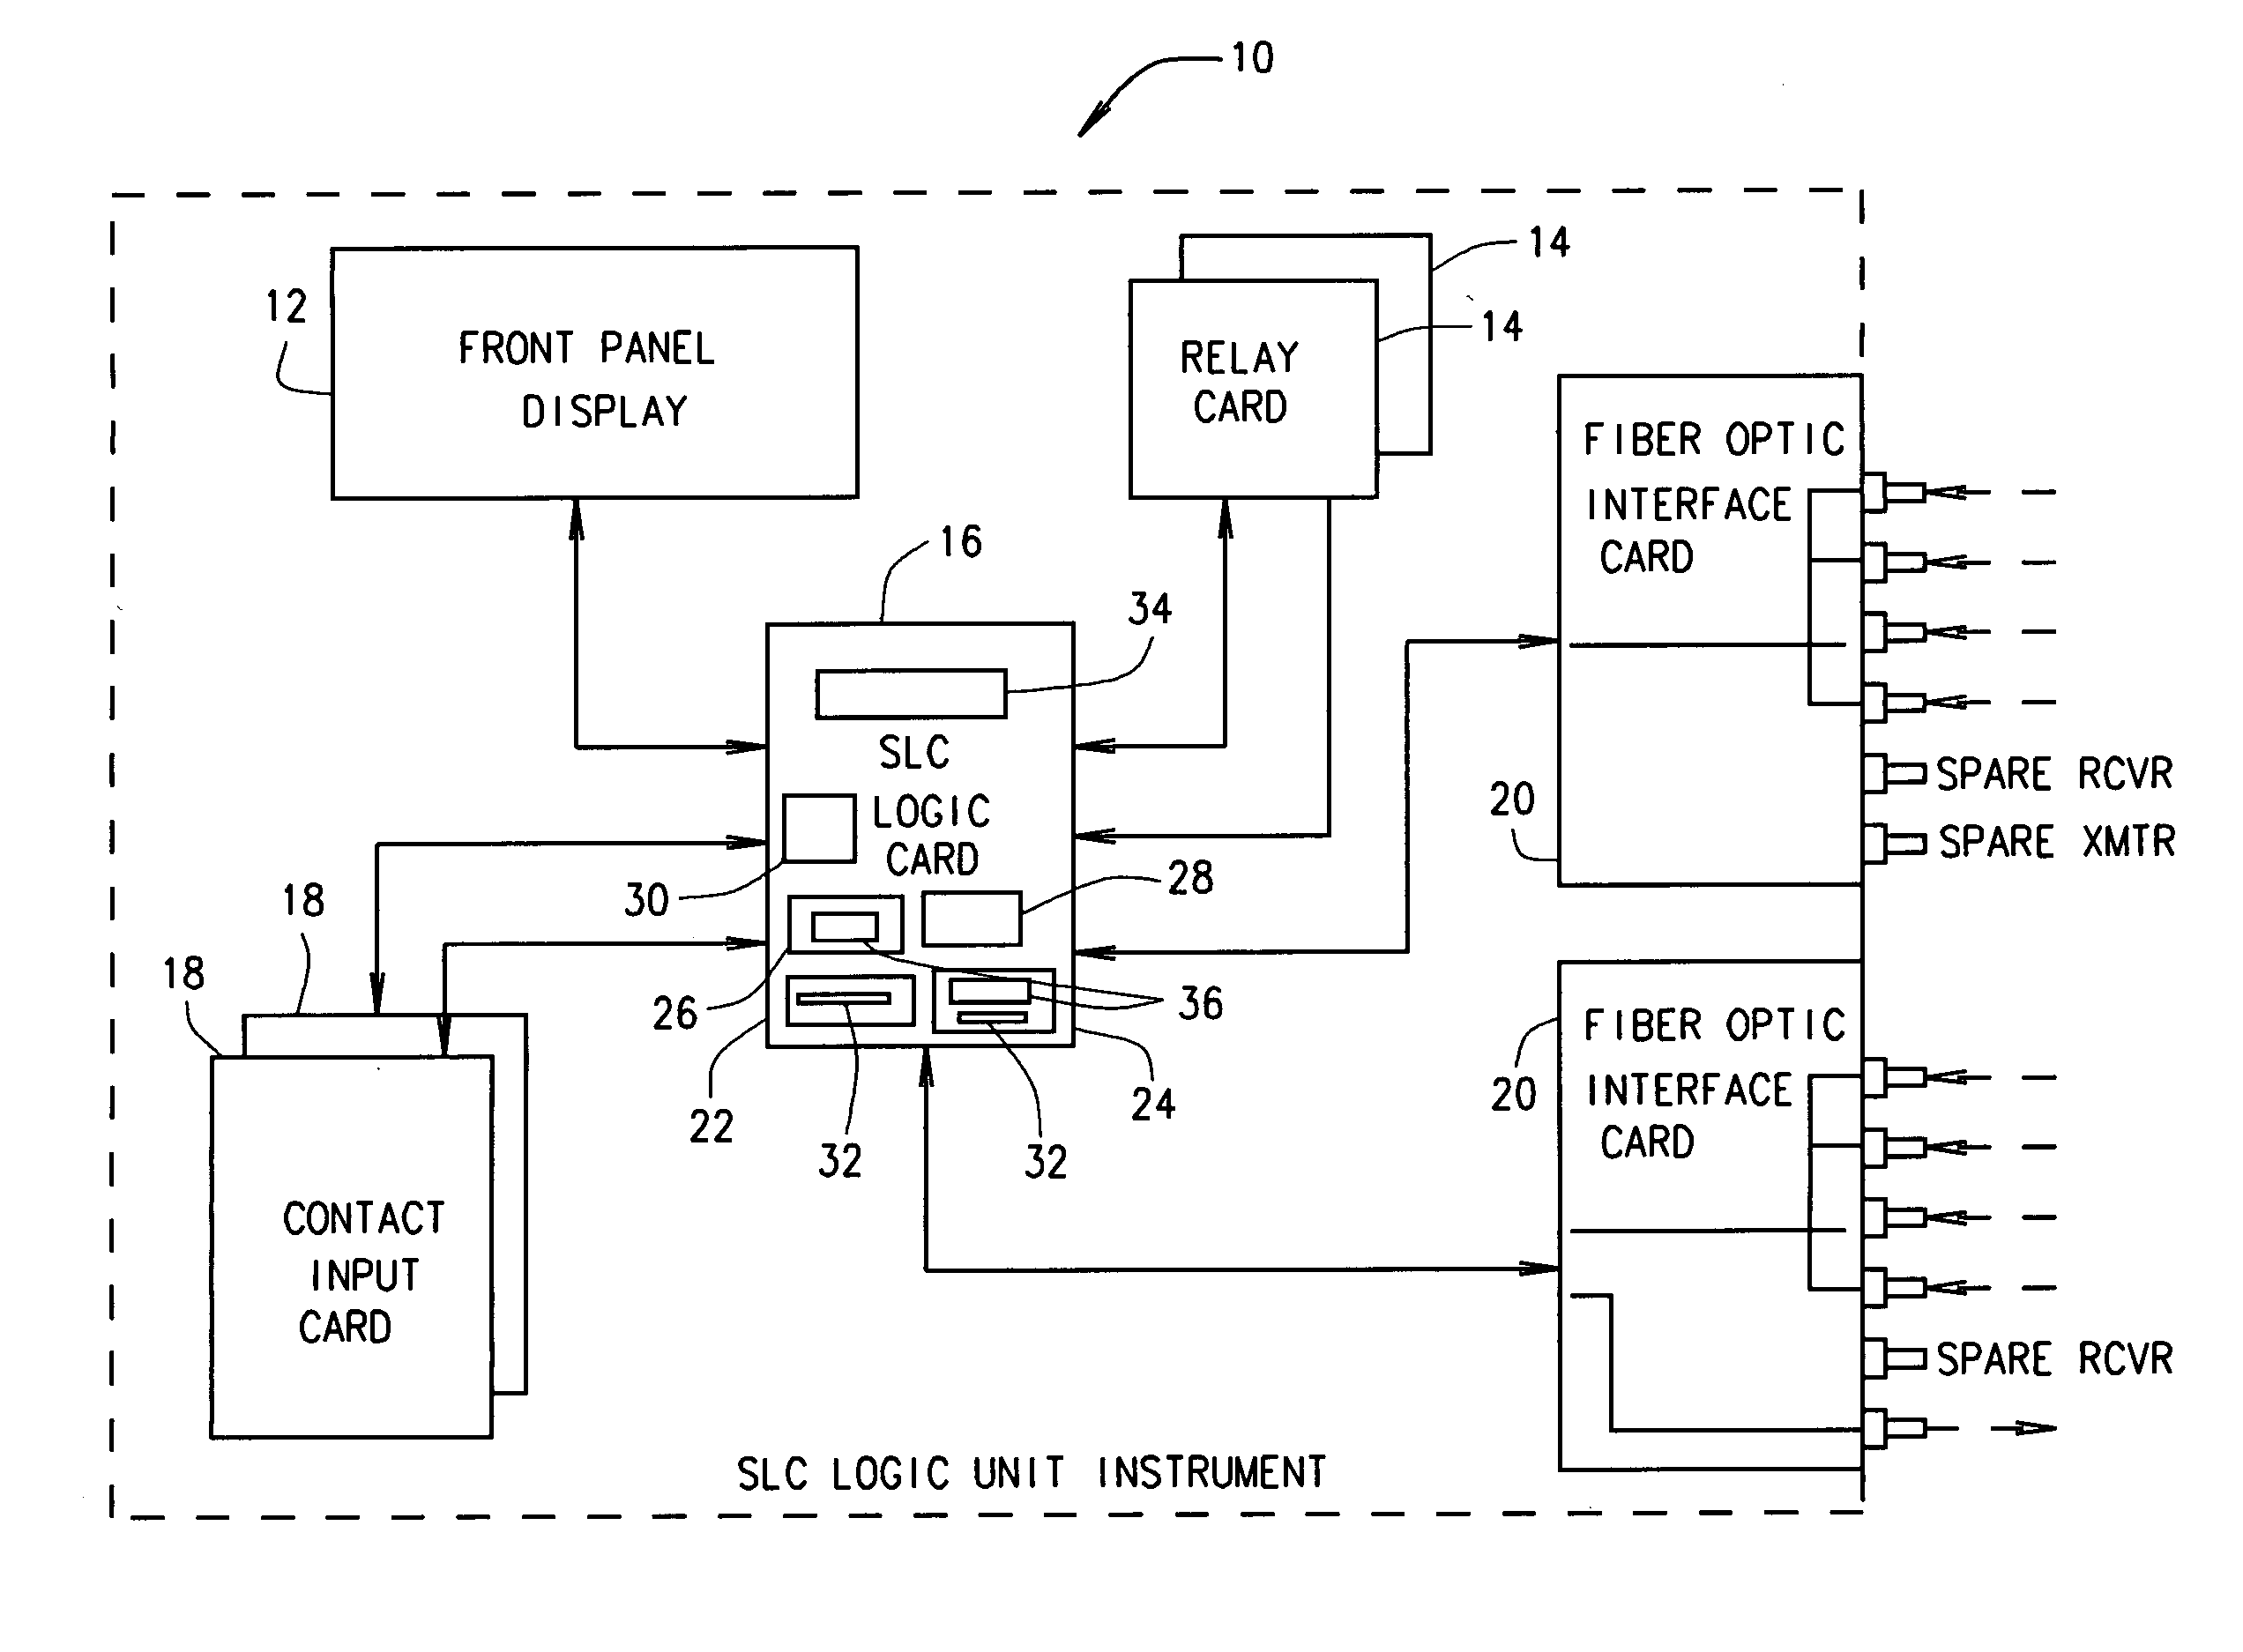 Software based control system for nuclear reactor standby liquid control (SLC) logic processor